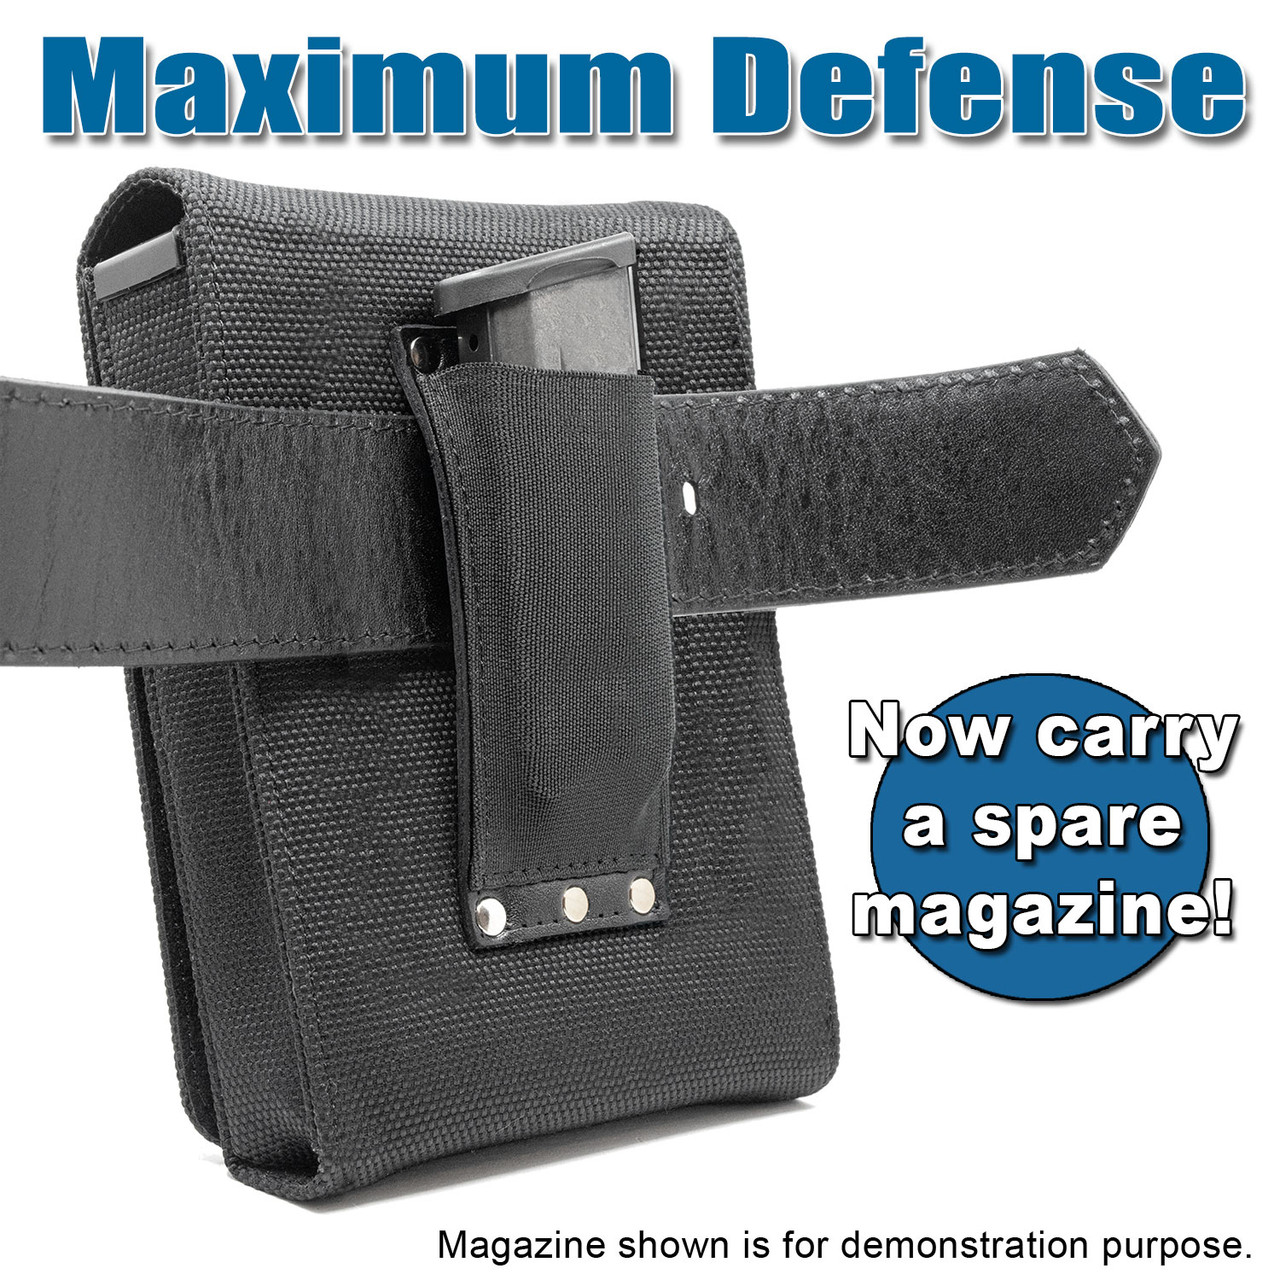 The Kahr CW9 Max Defense Holster